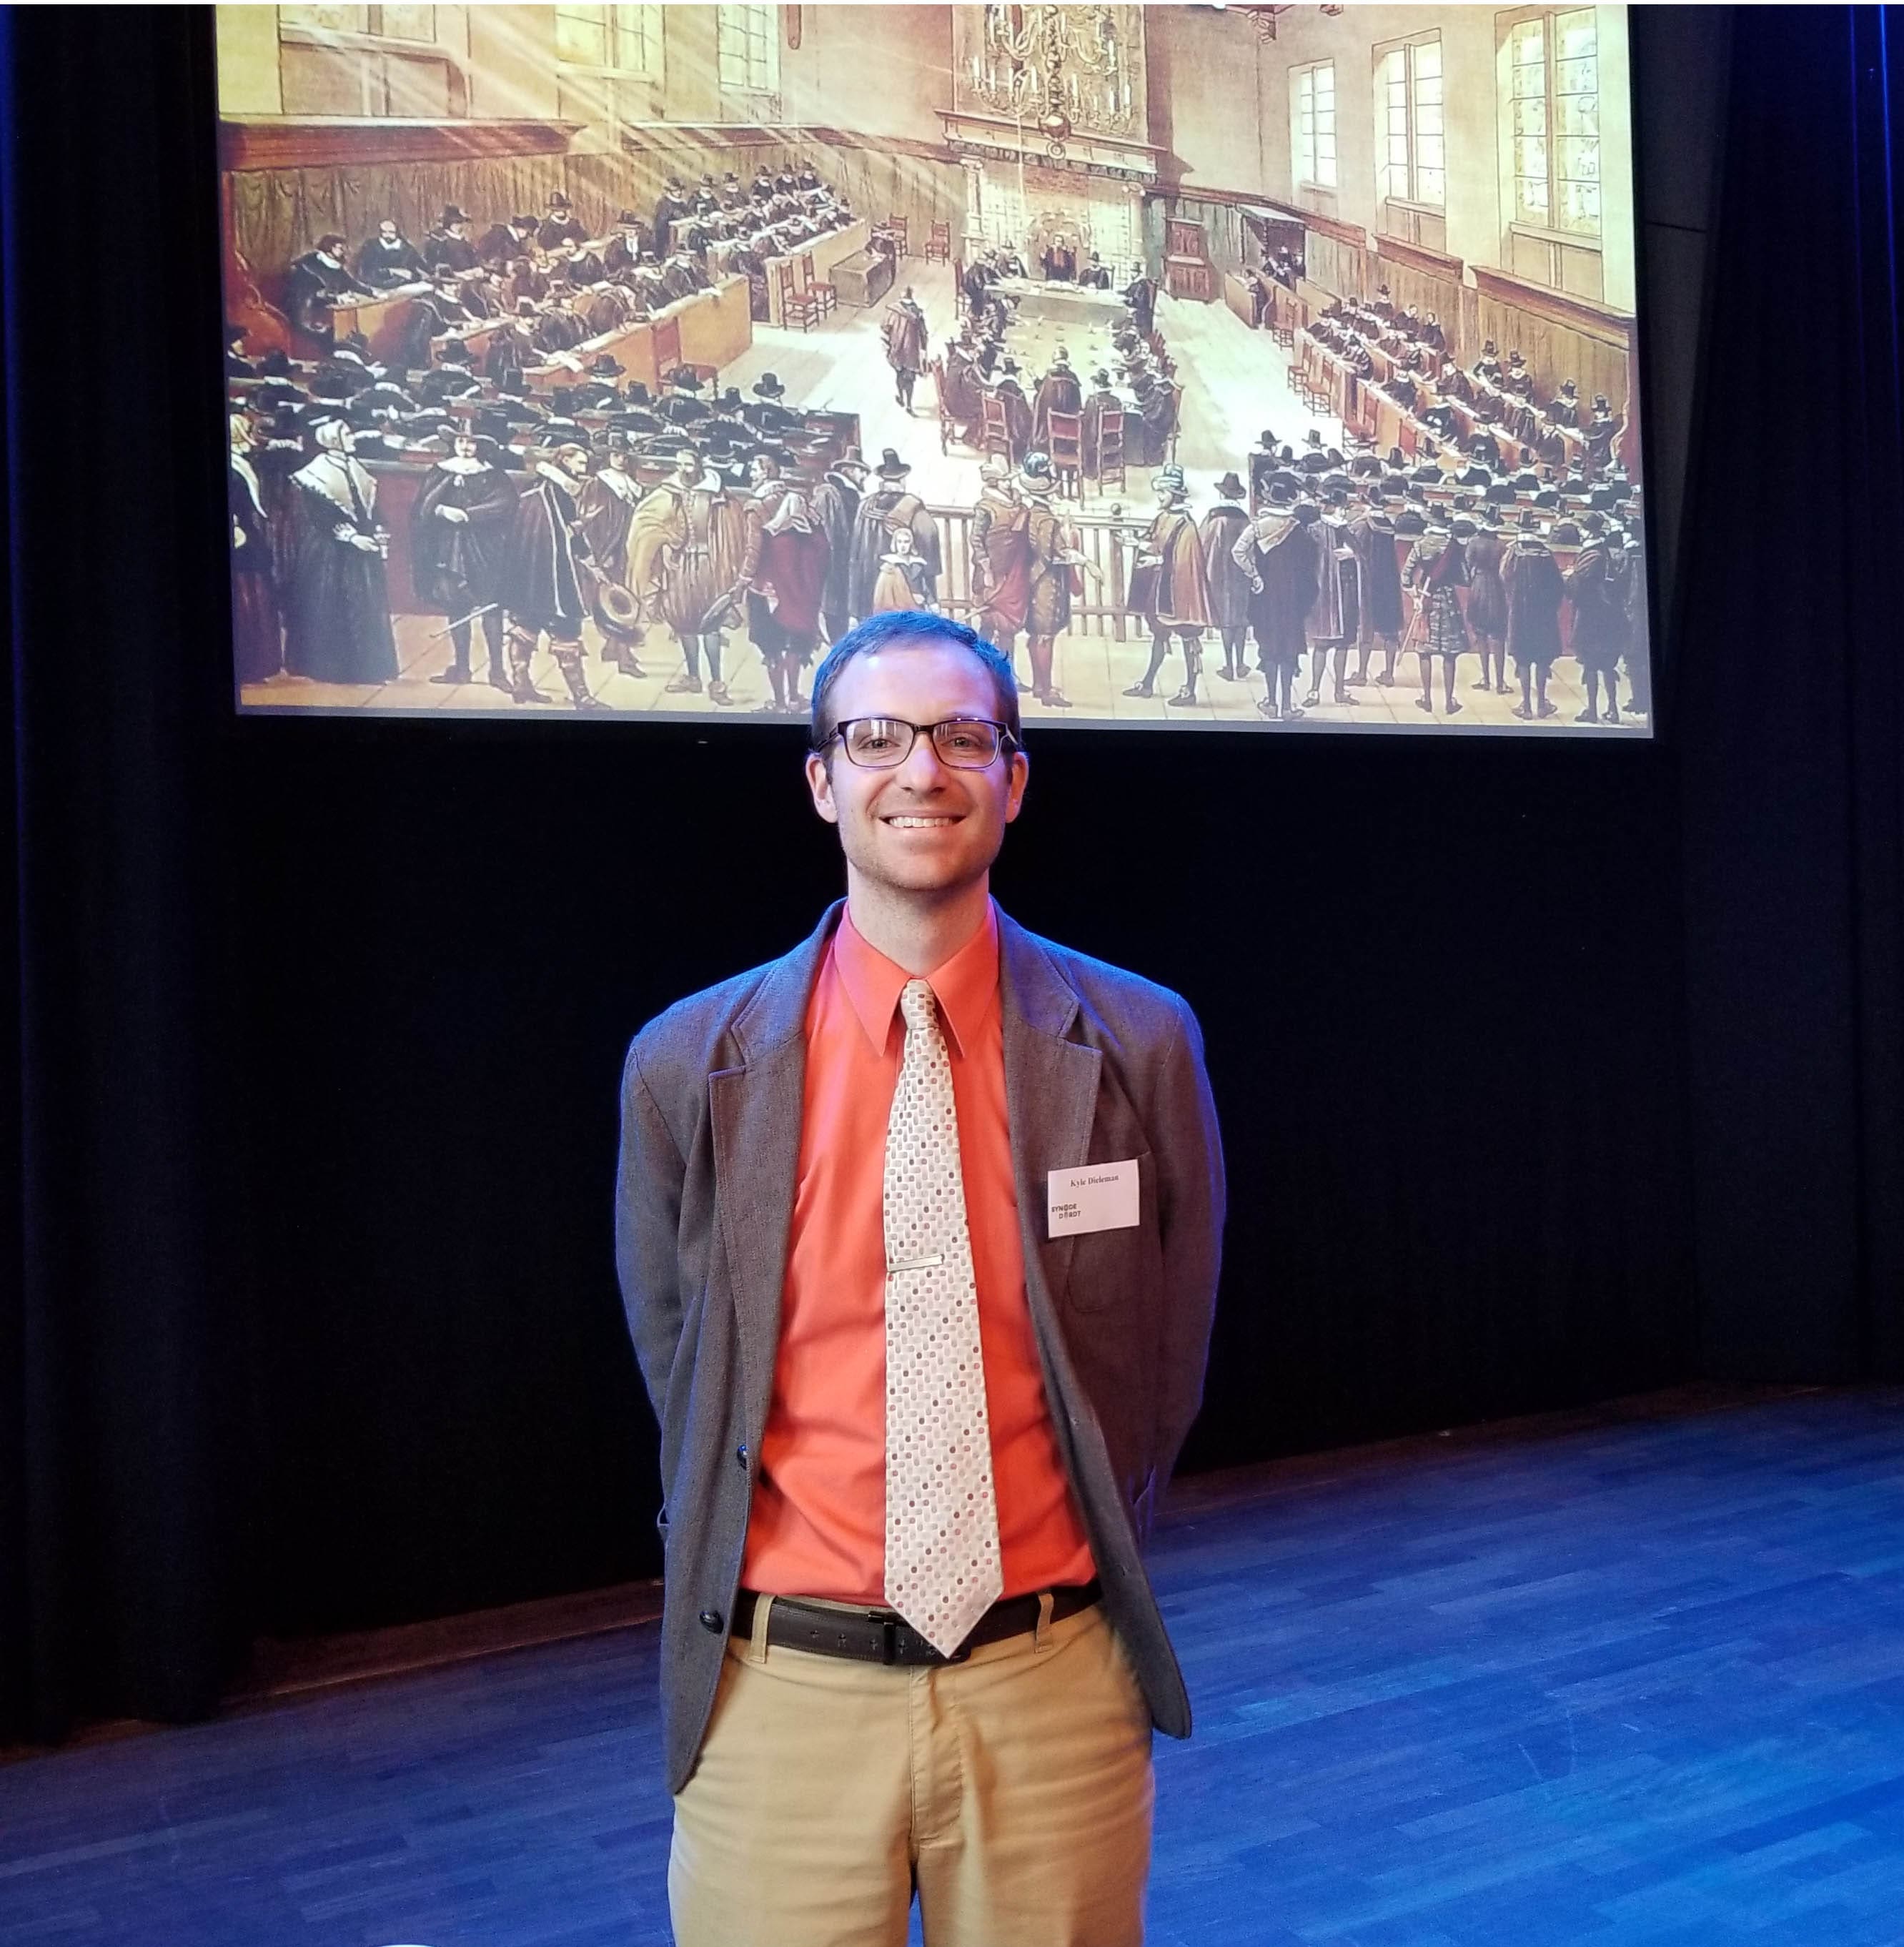 Dr. Kyle Dieleman spoke on “Education and Sabbath observance in Dutch Reformed churches” at the conference, which explored the implications of the Synod of Dordt 400 years ago.